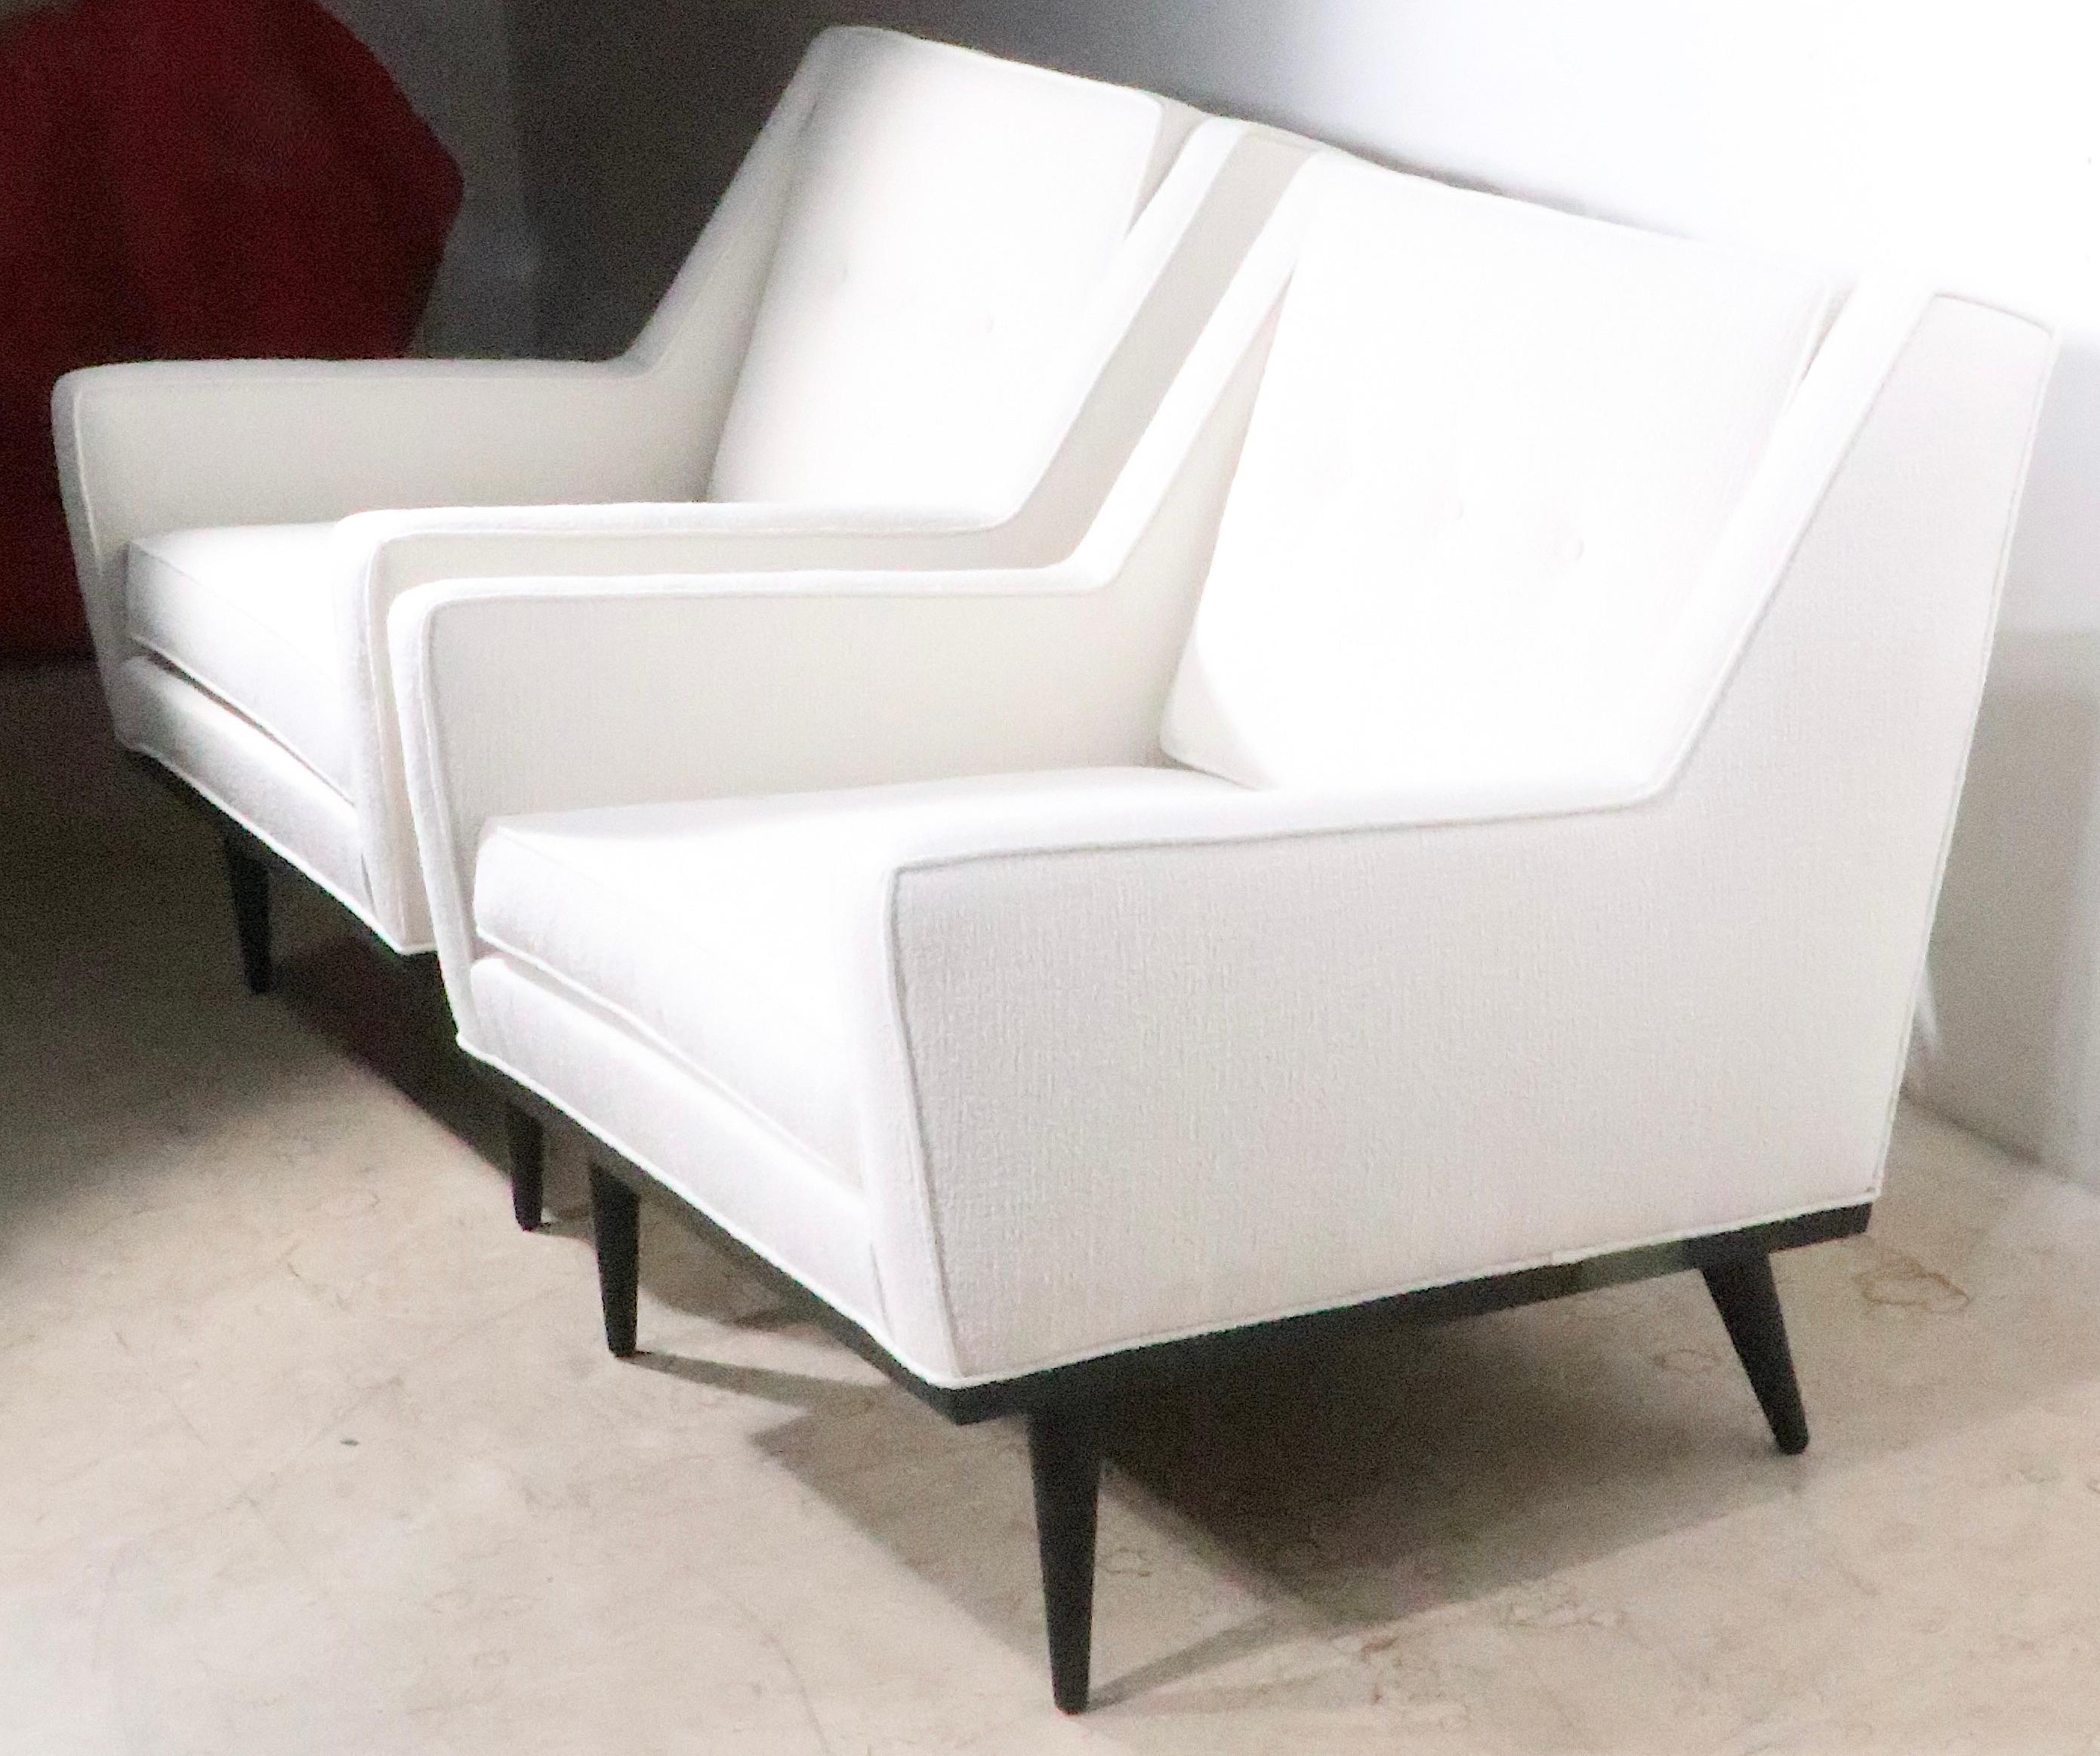 Iconic midcentury chairs, from Milo Baughman, for James Furniture Inc. These lounge chairs feature a voguish, and sophisticated design, angular and architectural, while still being relaxed and comfortable. Both have been completely professionally